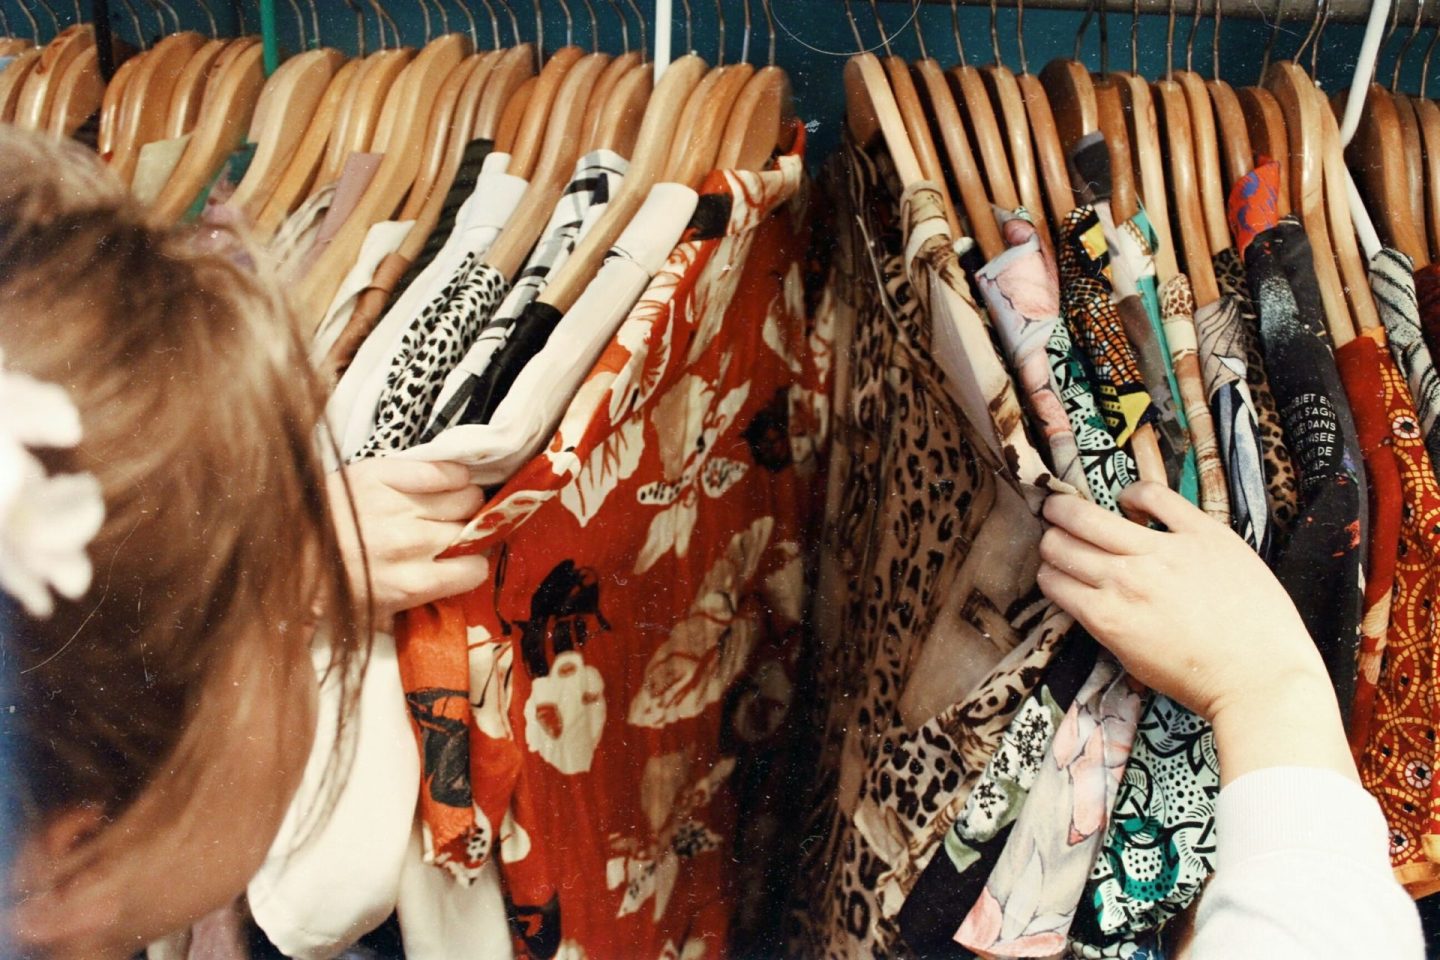 What Is Vintage Fashion?